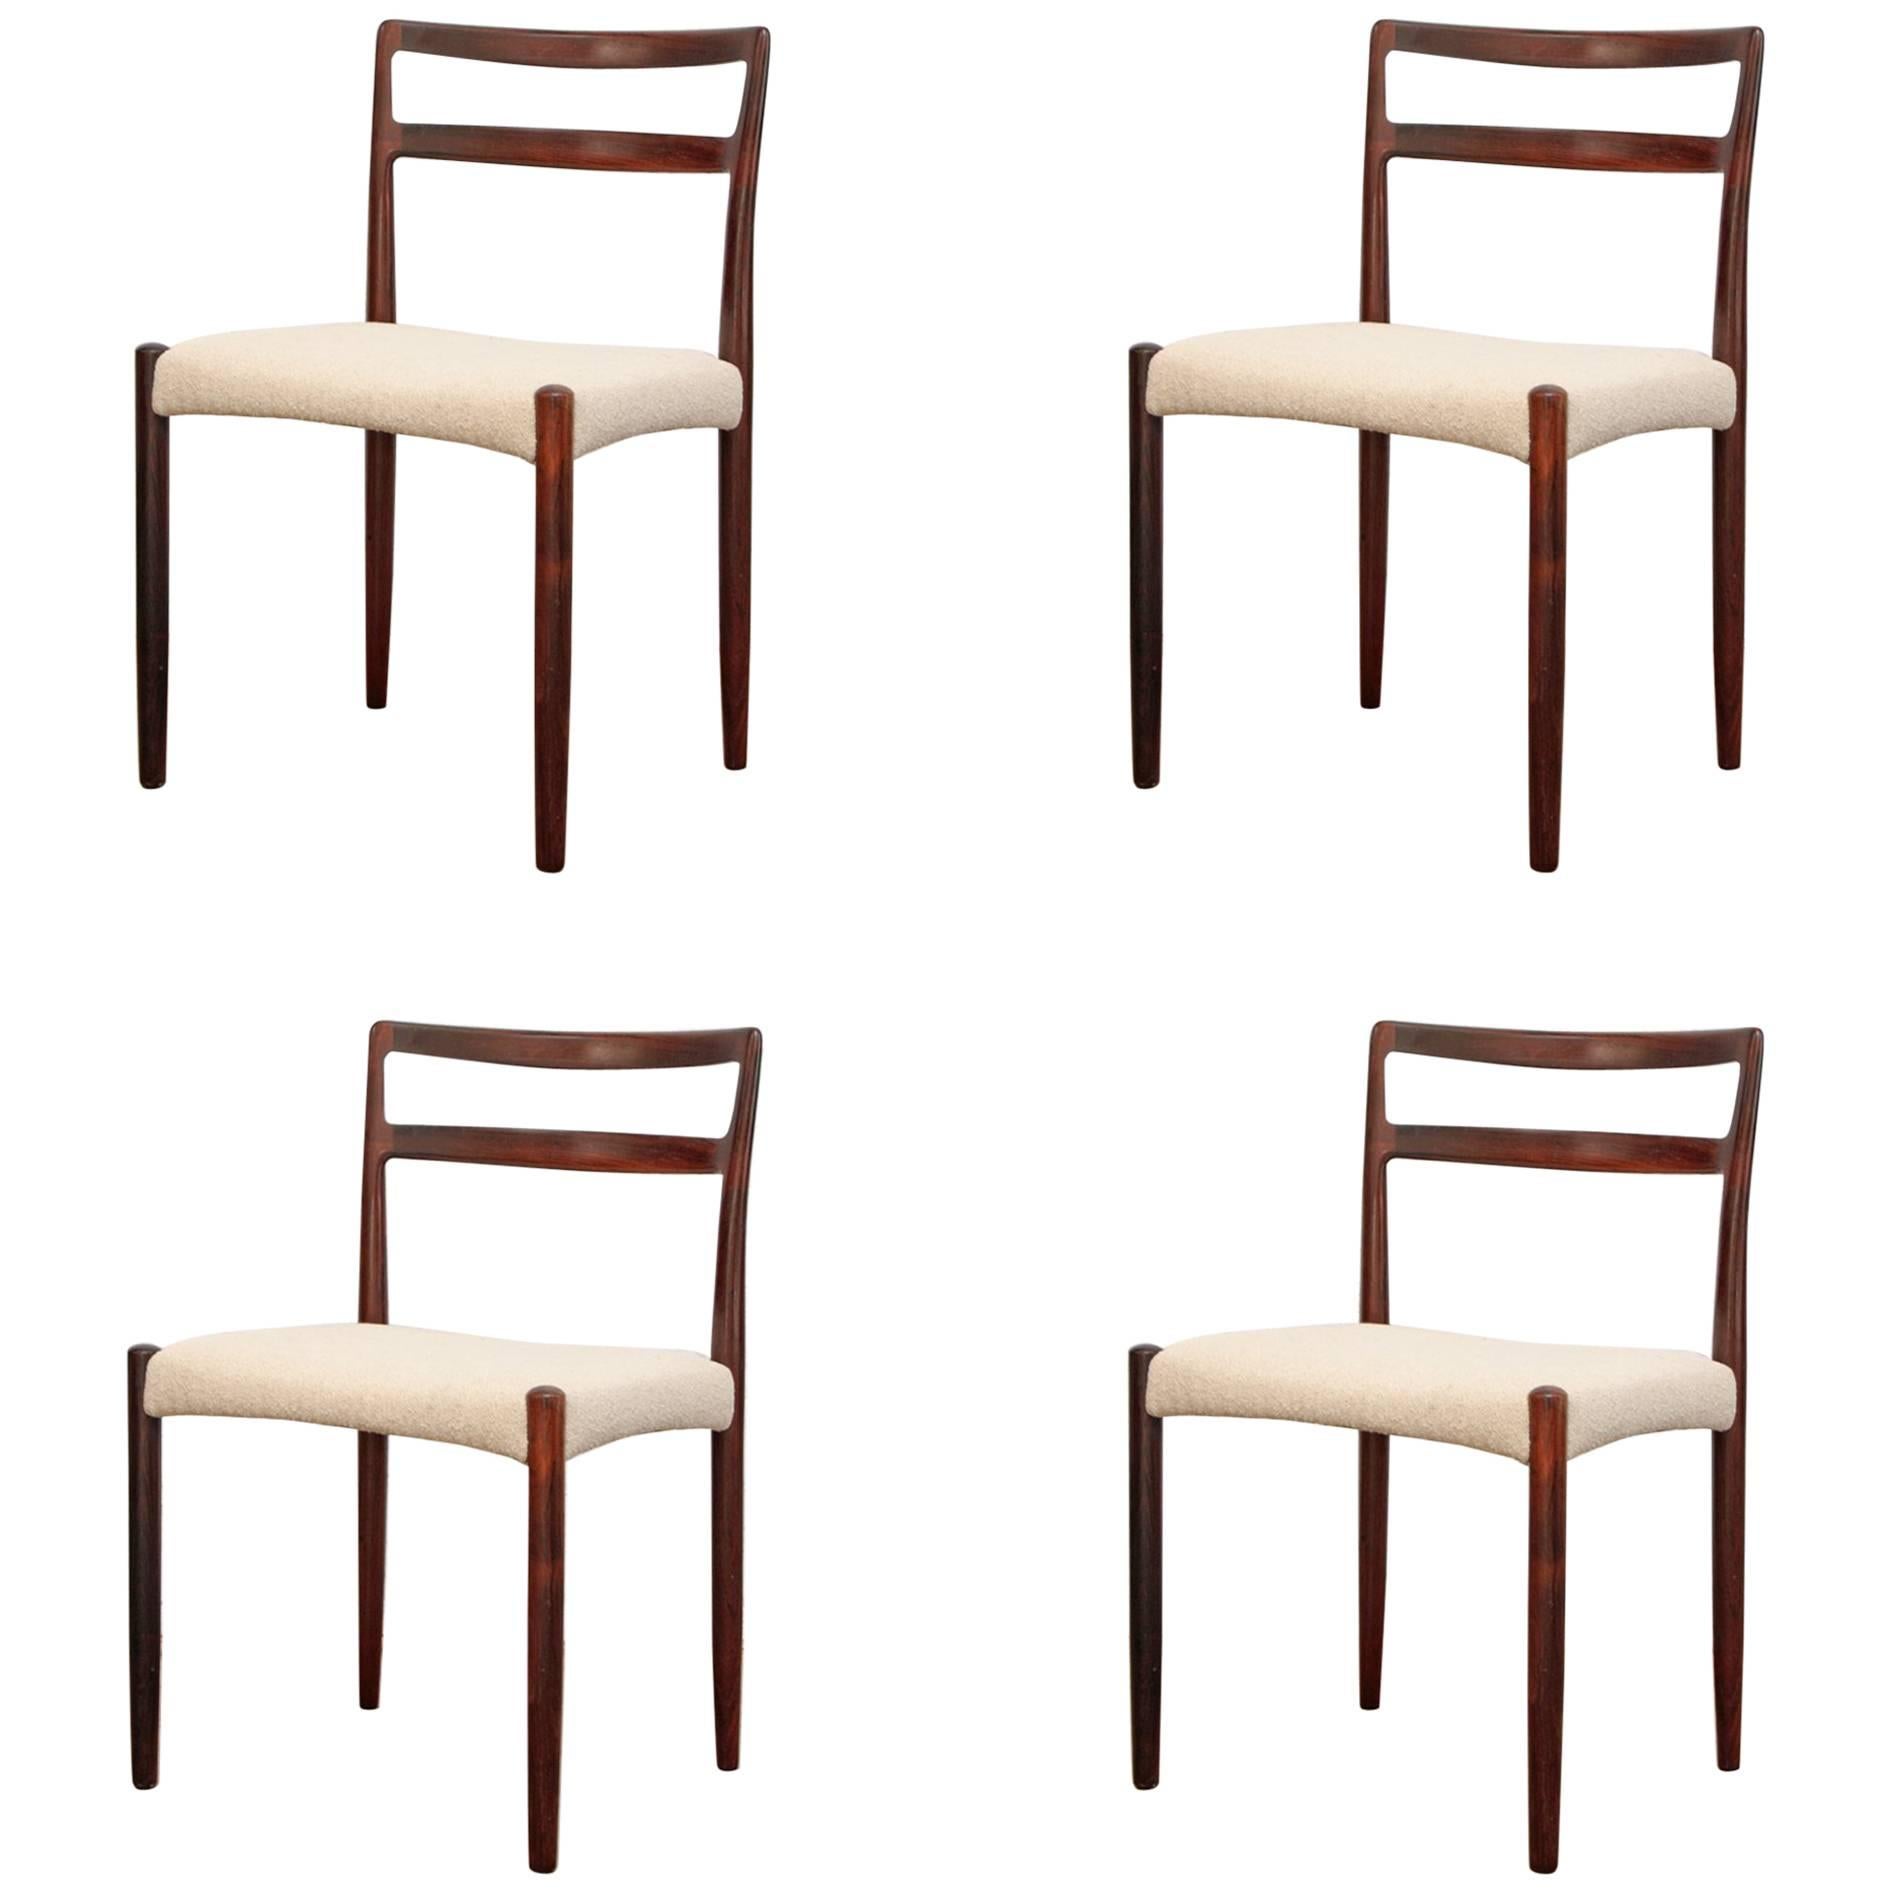 Four Niels Moller Rosewood Dining Chairs